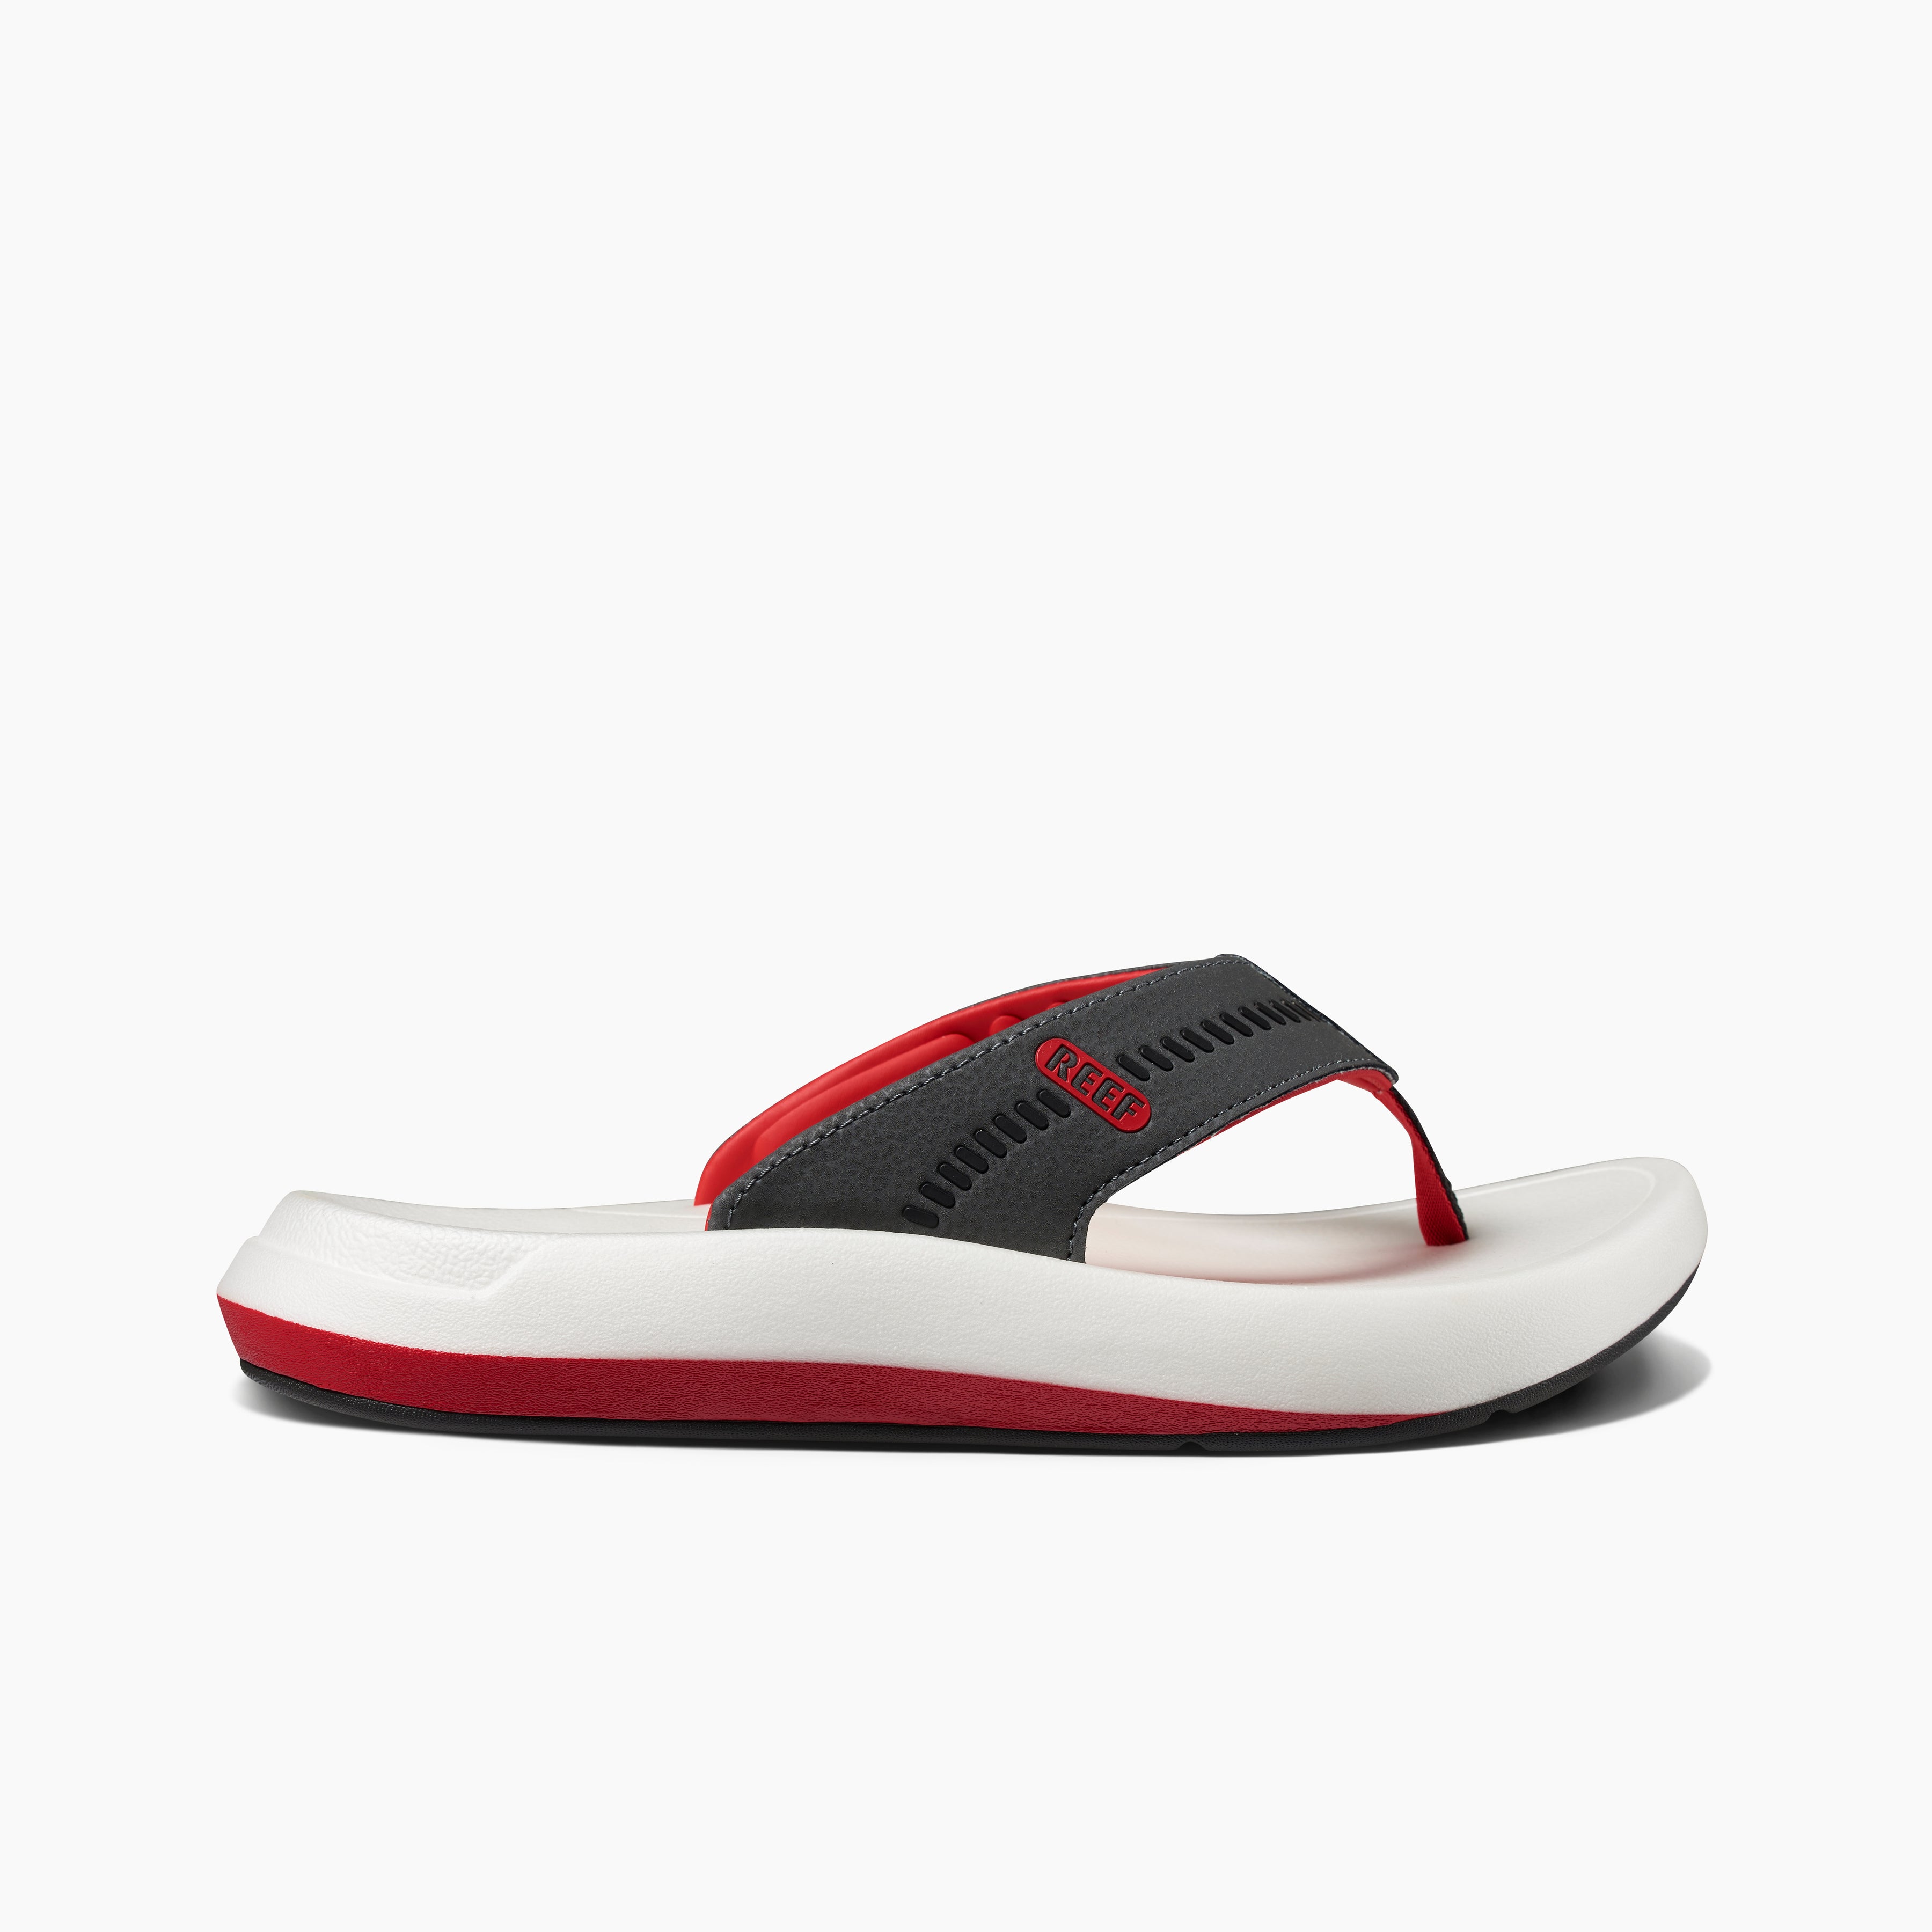 Men's Swellsole Cruiser Sandals in White/Black/Red side view